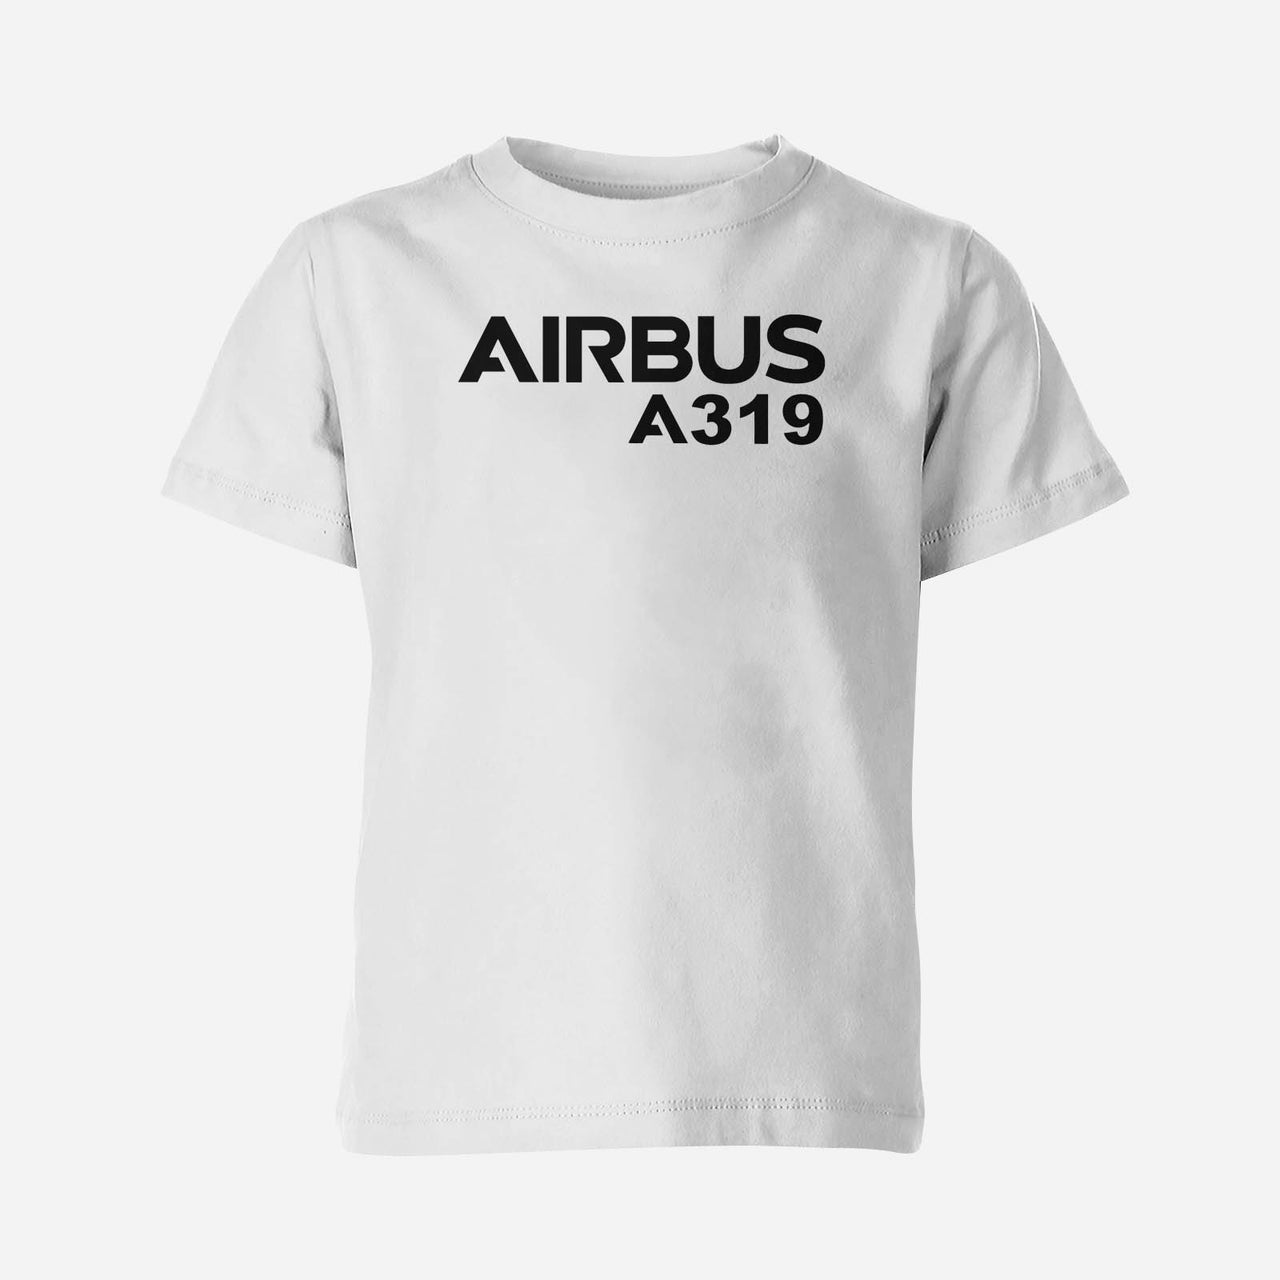 Airbus A319 & Text Designed Children T-Shirts